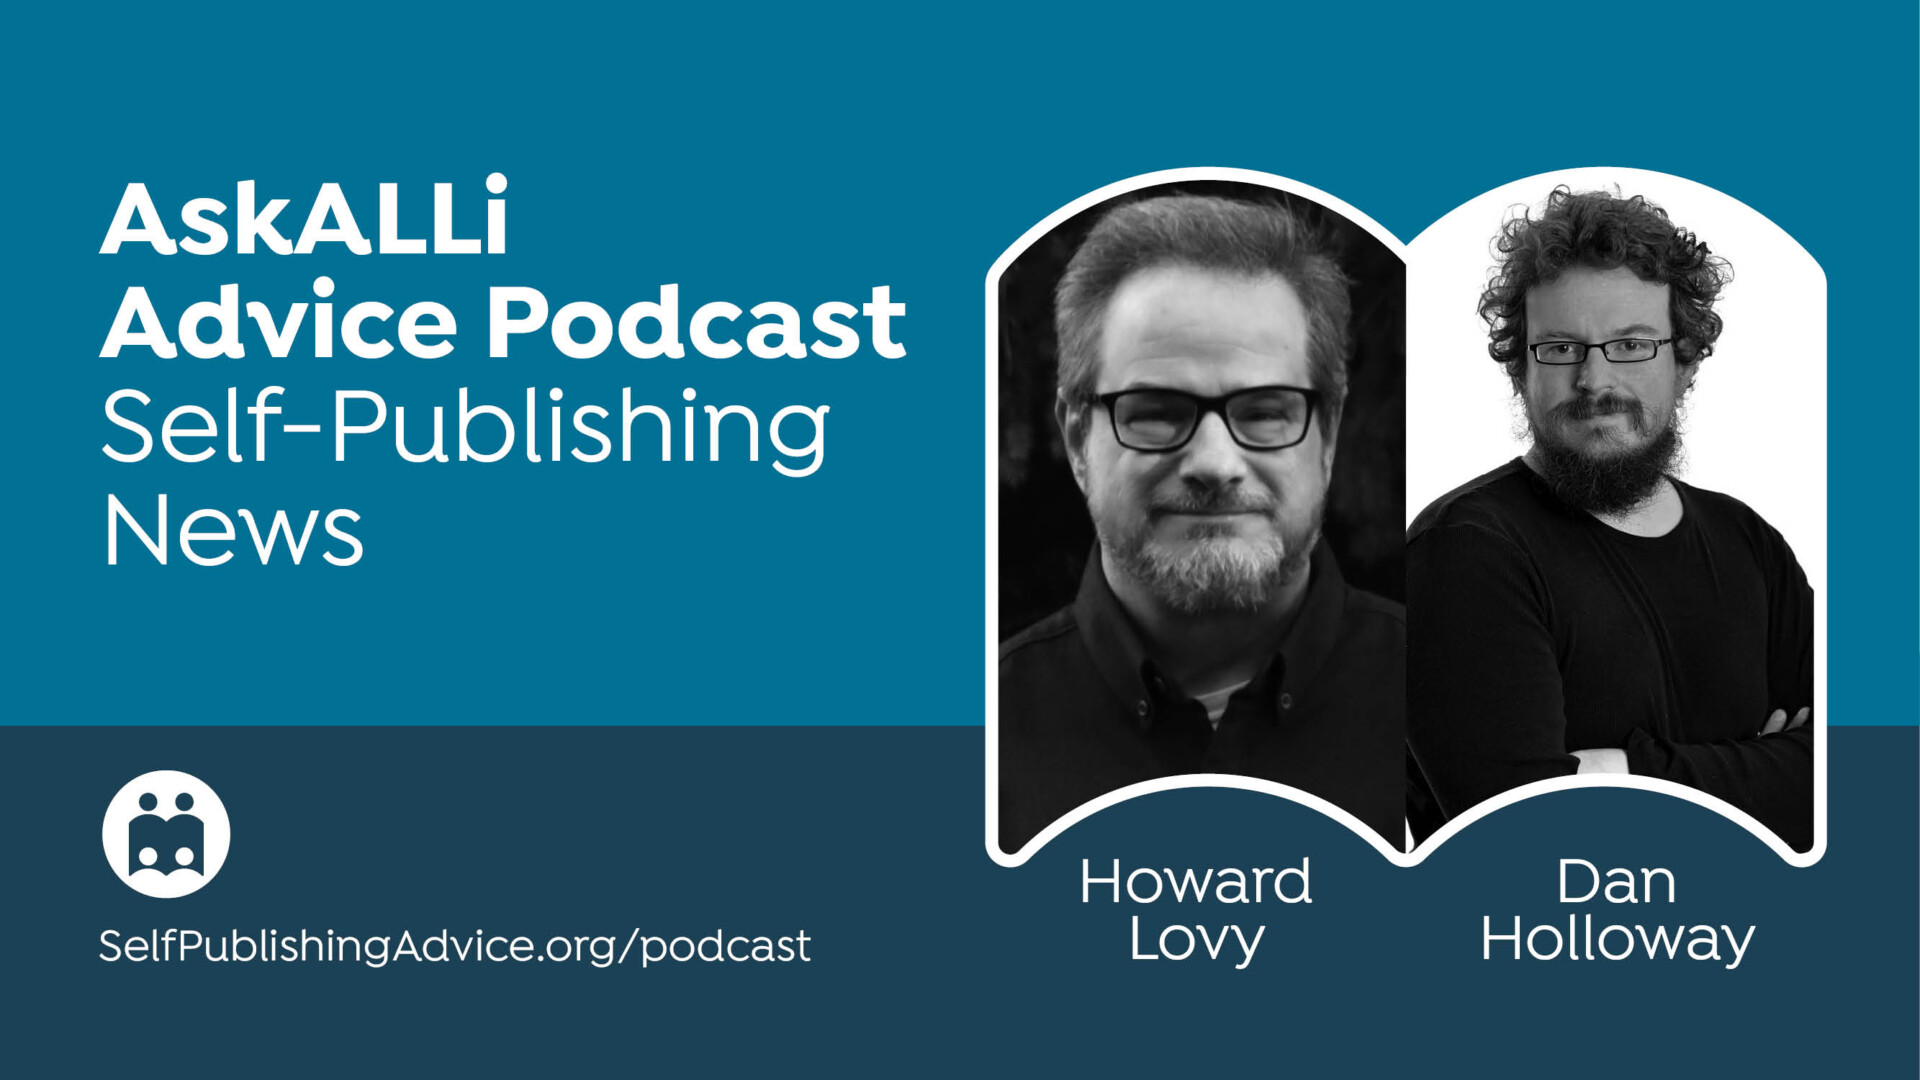 A Report From The Futurebook Conference; Spotify Buys Findaway In Audiobook Game-Changer: Self-Publishing News Podcast With Dan Holloway And Howard Lovy